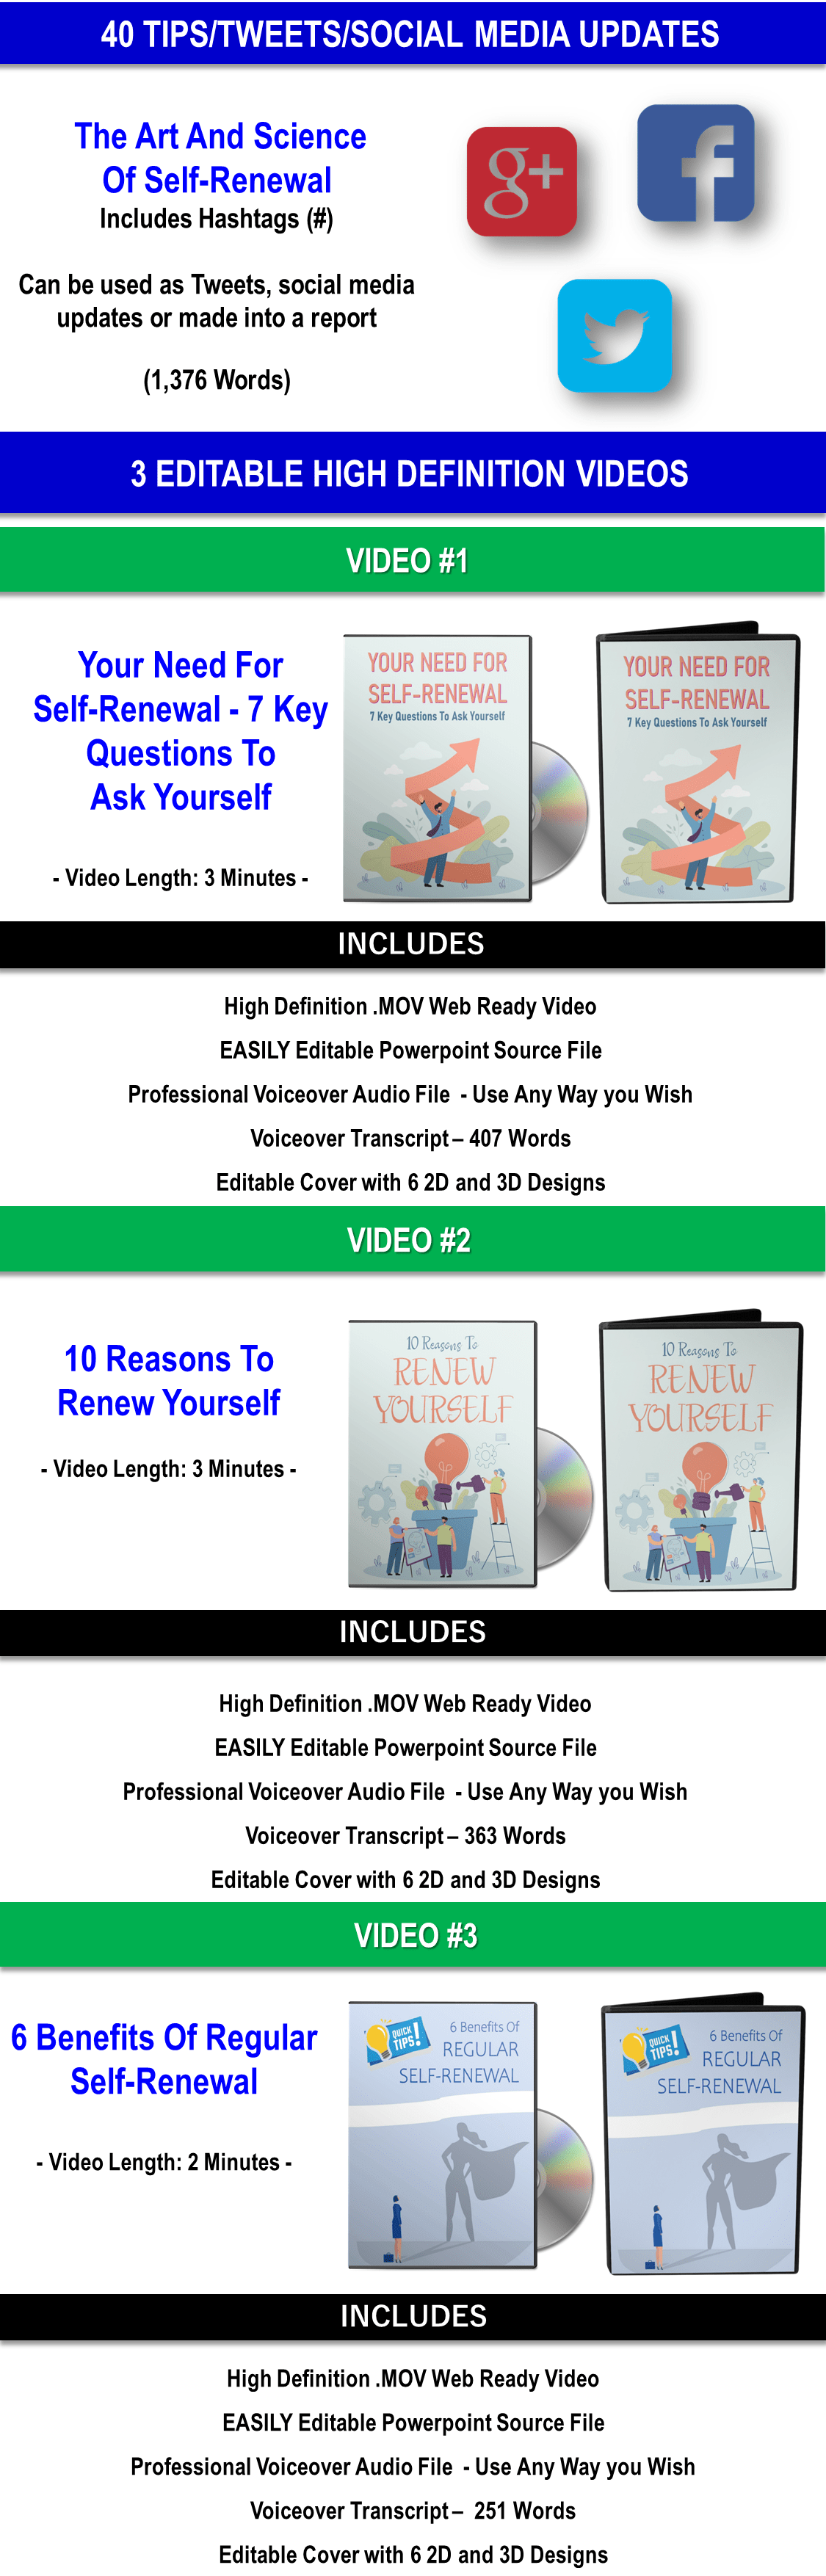 The Power Of Self-Renewal: Regroup, Reprioritize And Reinvent Yourself This New Year Giant Content Pack PLR Rights